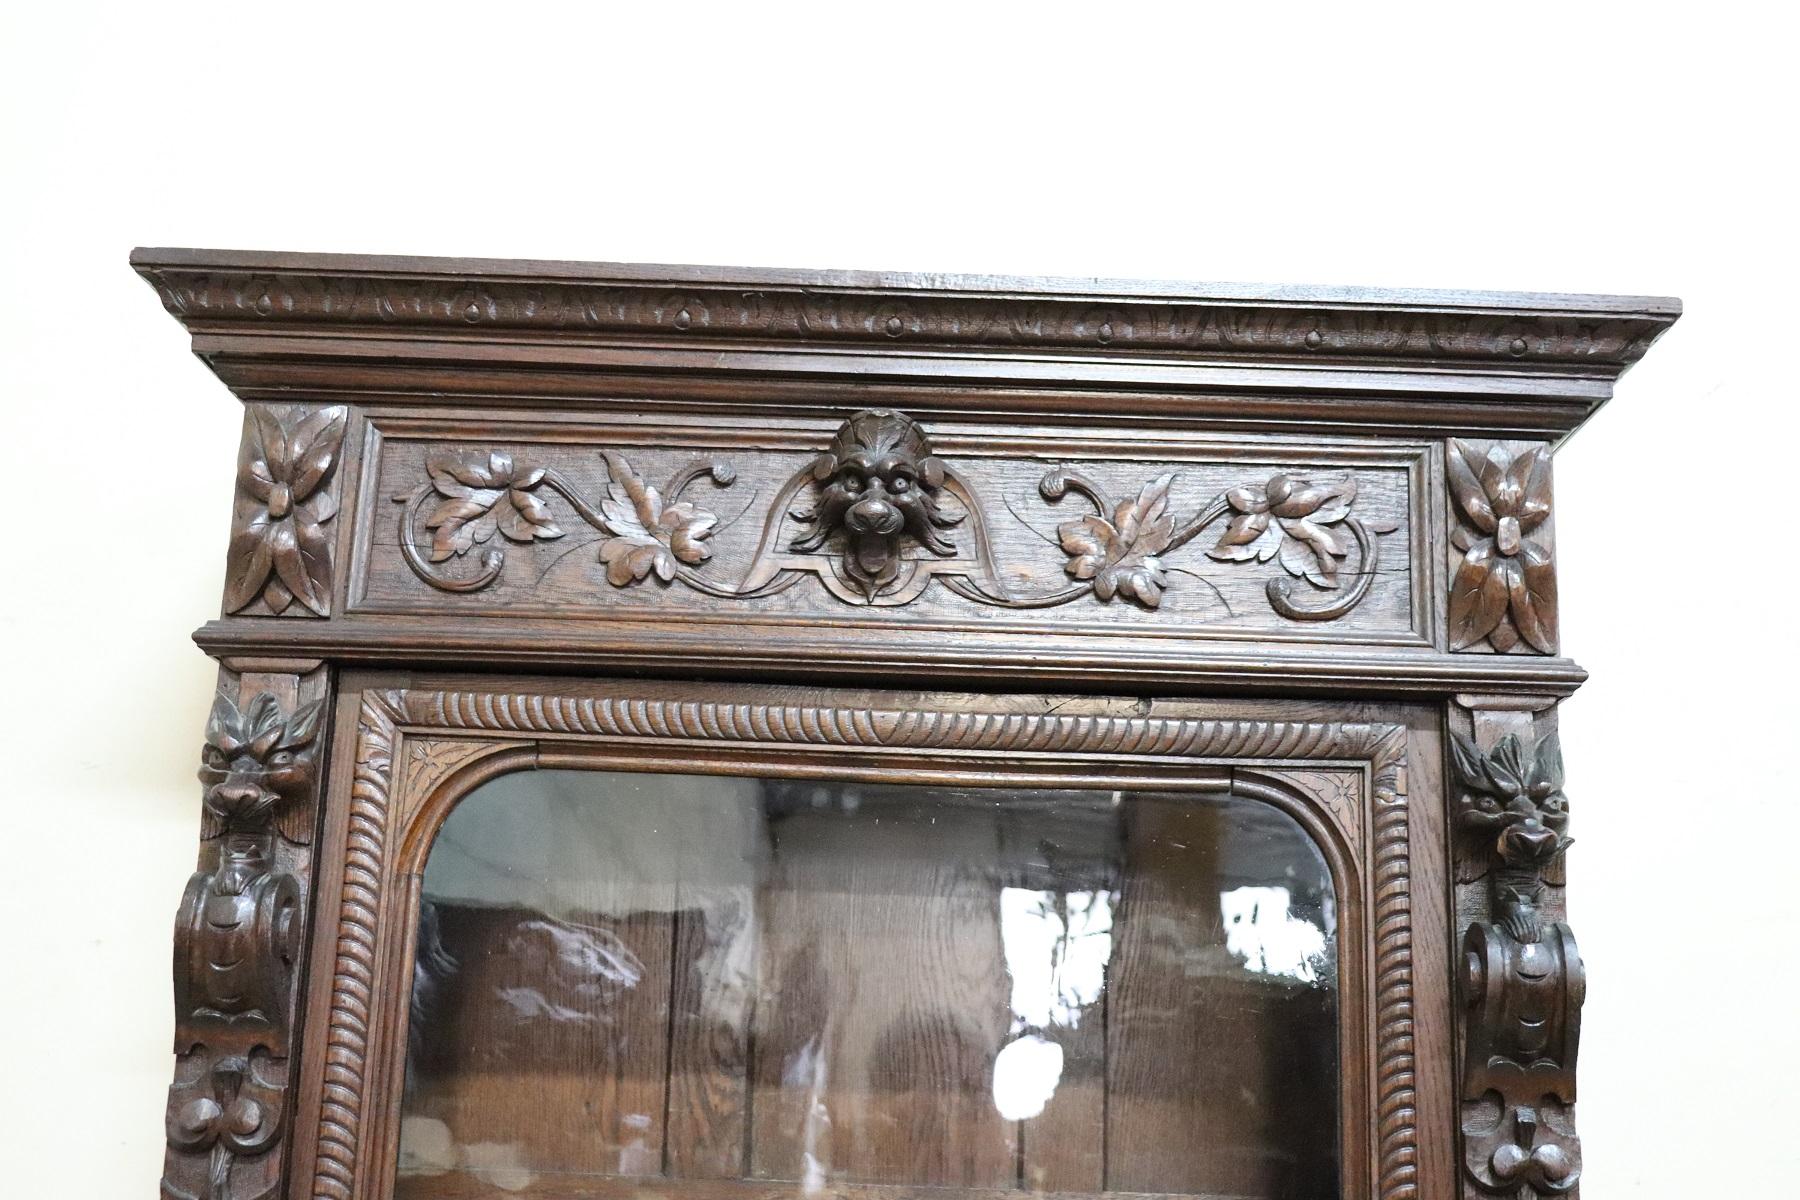 Impressive rare bookcase or sideboard in perfect Italian Renaissance style. Made of finely carved oakwood. The entire front part has rich carving in wood with zoomorphic figures. Feline feet carved in wood. The upper part with antique glass can be